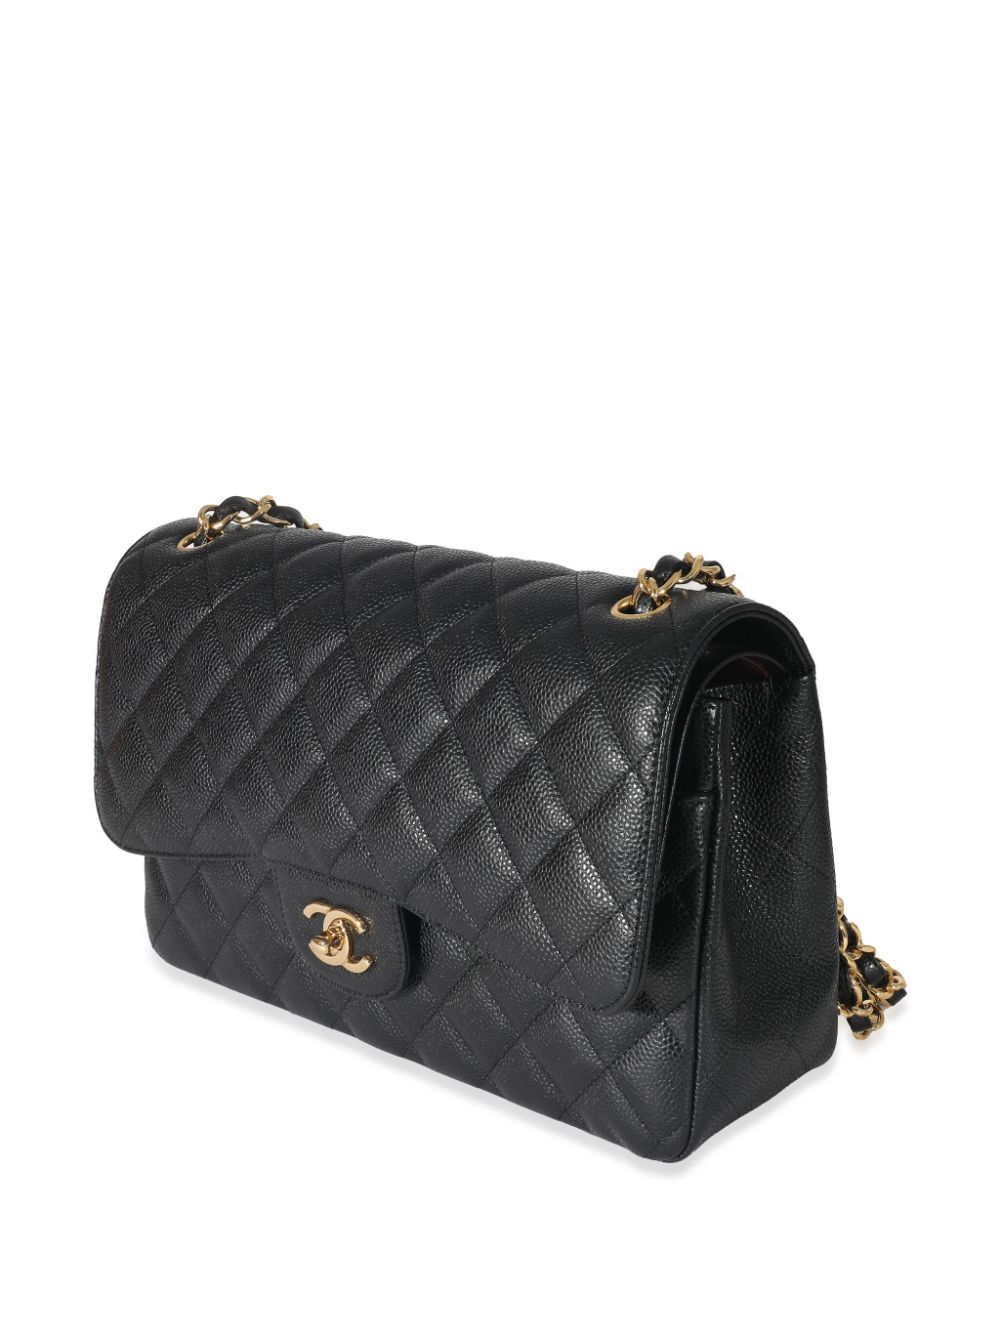 Pre-owned Chanel 2019 Jumbo Classic Flap Shoulder Bag In Black